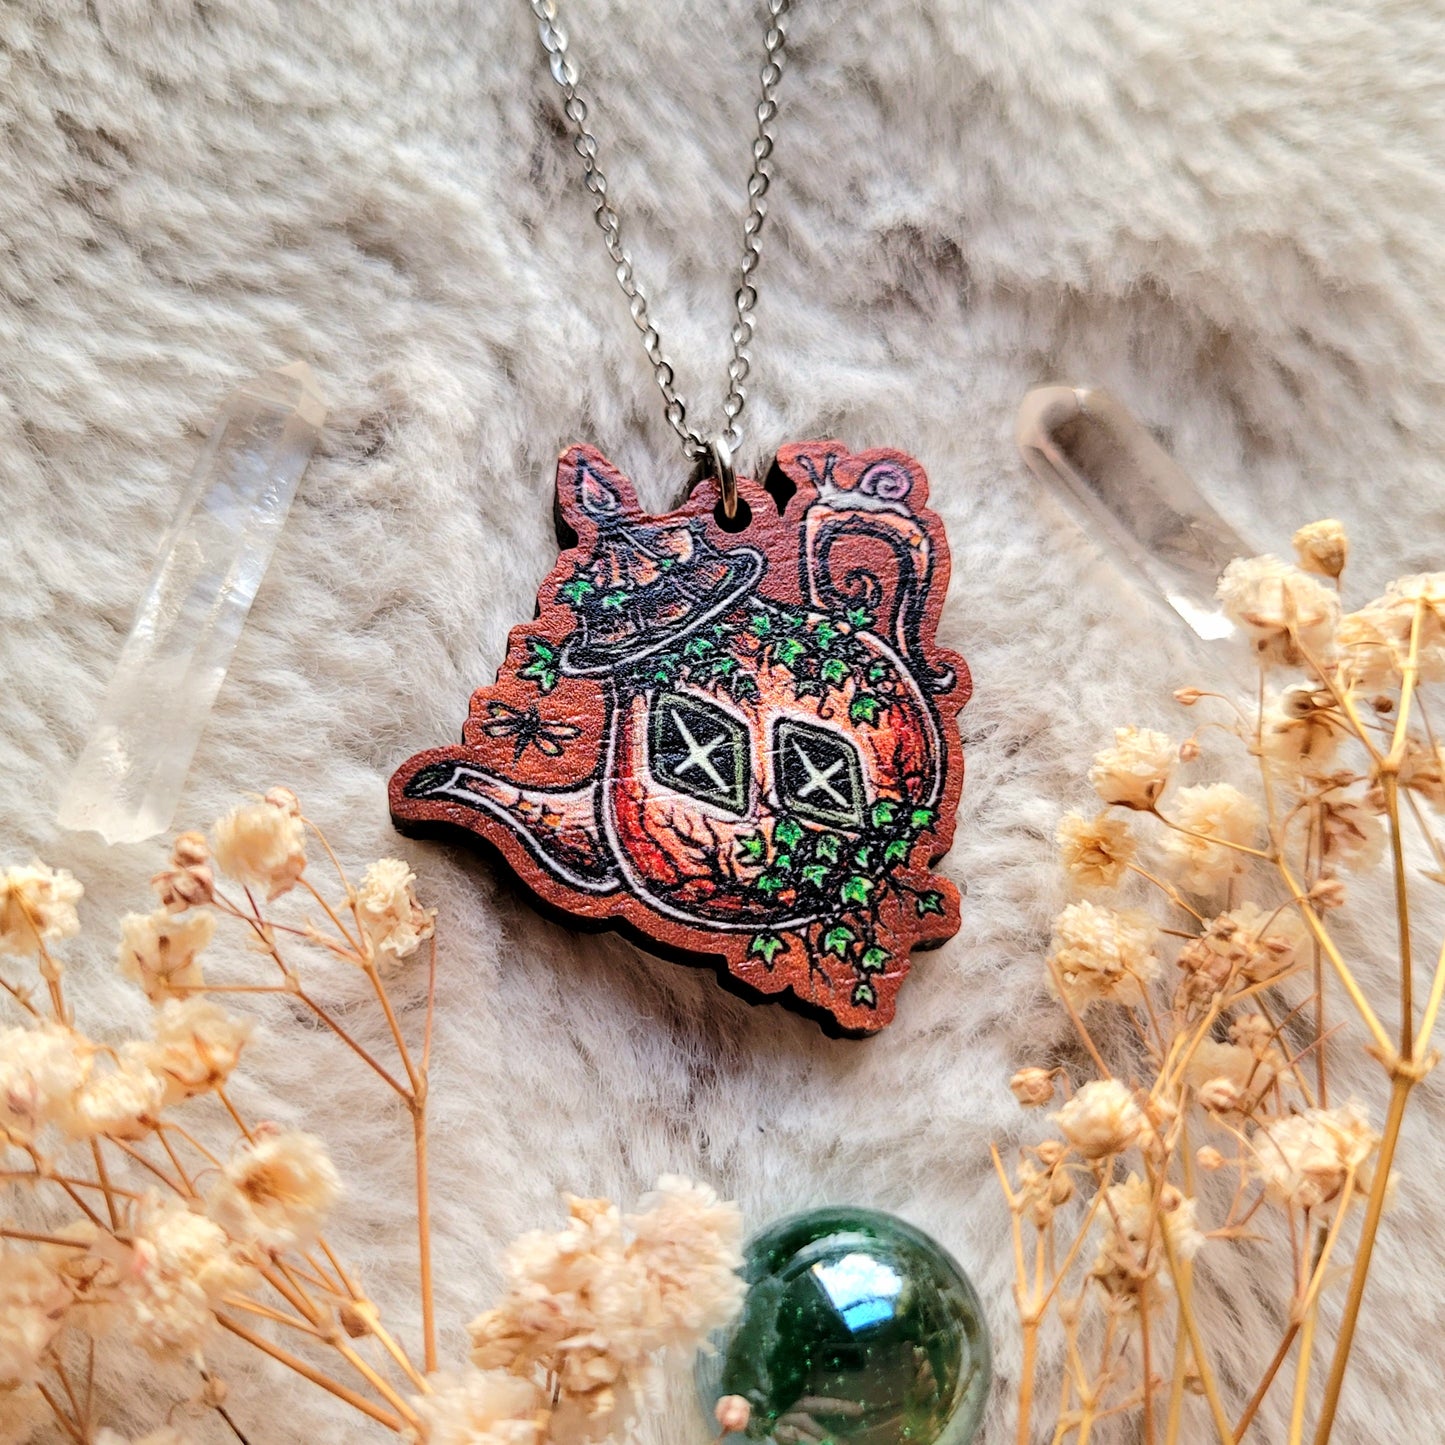 Fairy Teapot Illustrated necklace, responsibly sourced cherry wood, chain options available, by Grace Moth